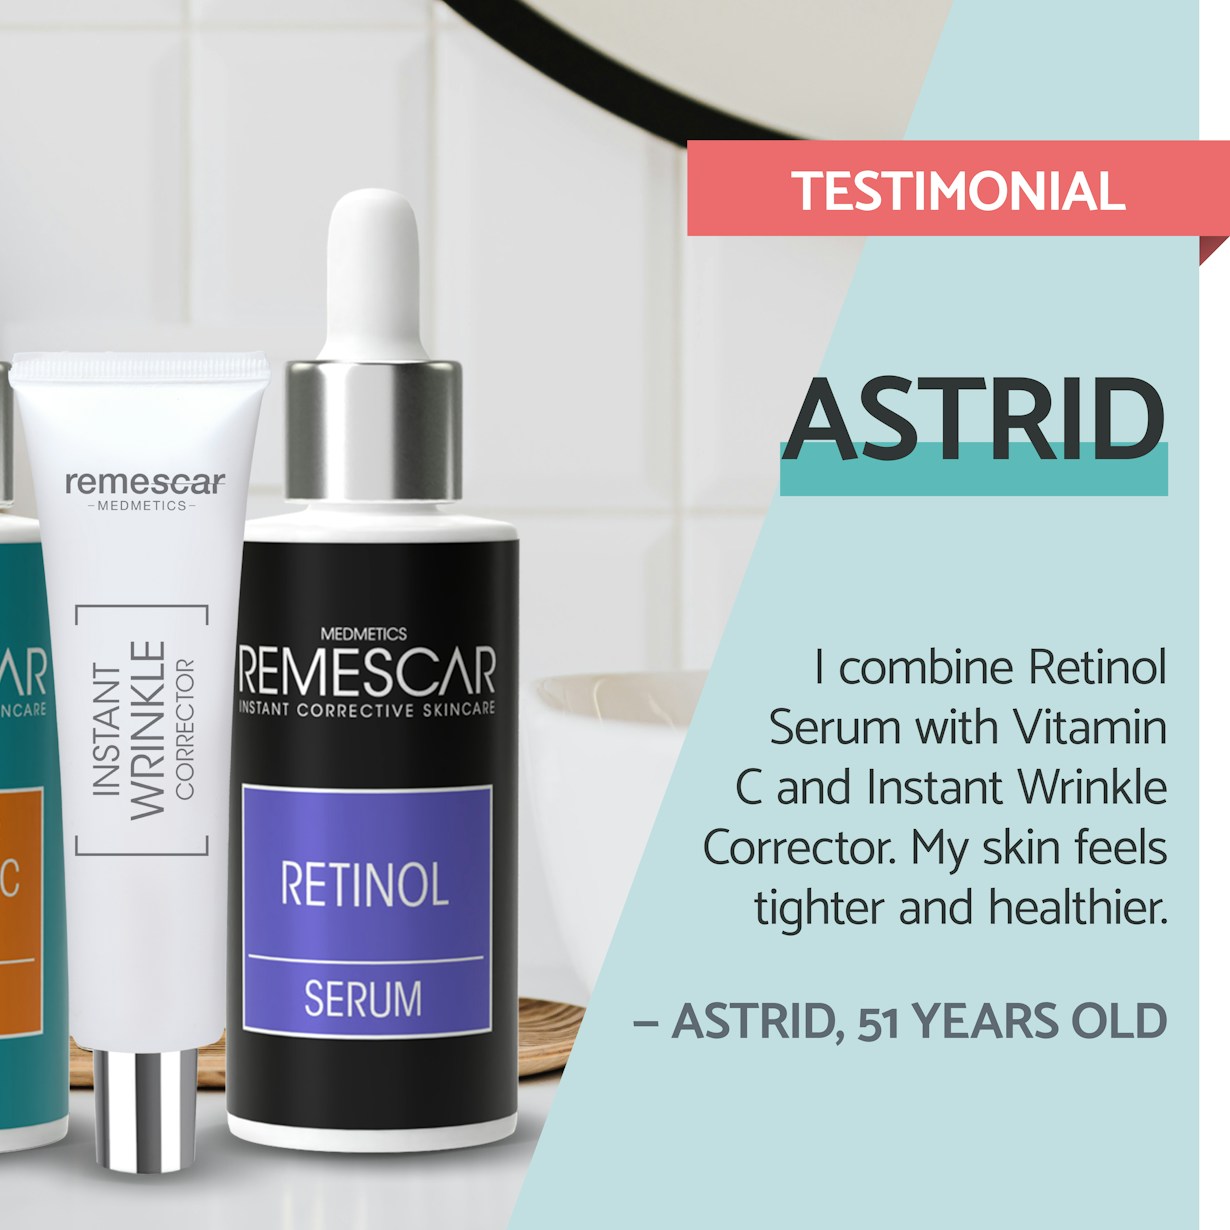 Remescar pdp pictures website and amazon 2000x2000px retinol serum EN5